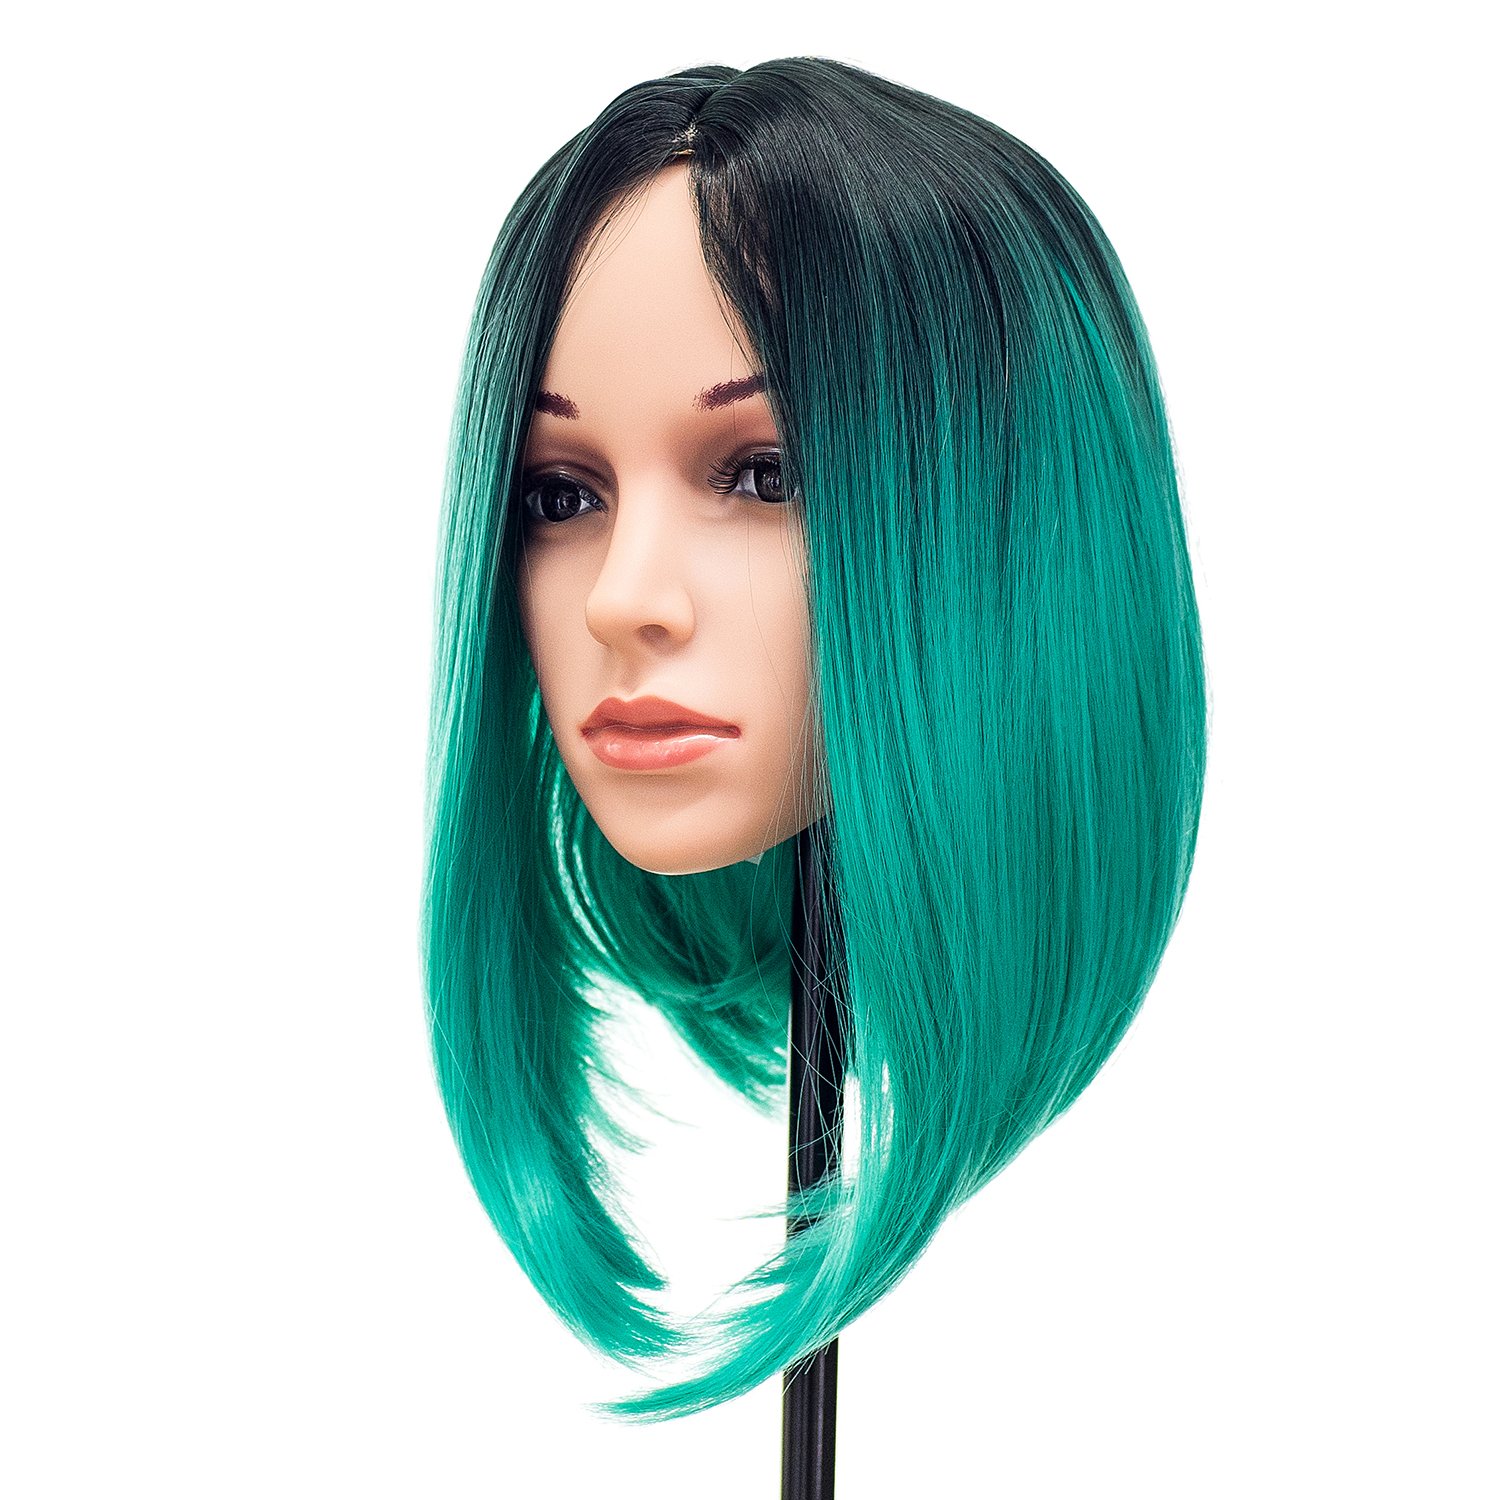 Daifeer Ombre Colors Straight Short Hair Bob Wig Synthetic Colorful Cosplay Daily Party Flapper Wig for Women and Kids with Wig Cap (Teal Blue)